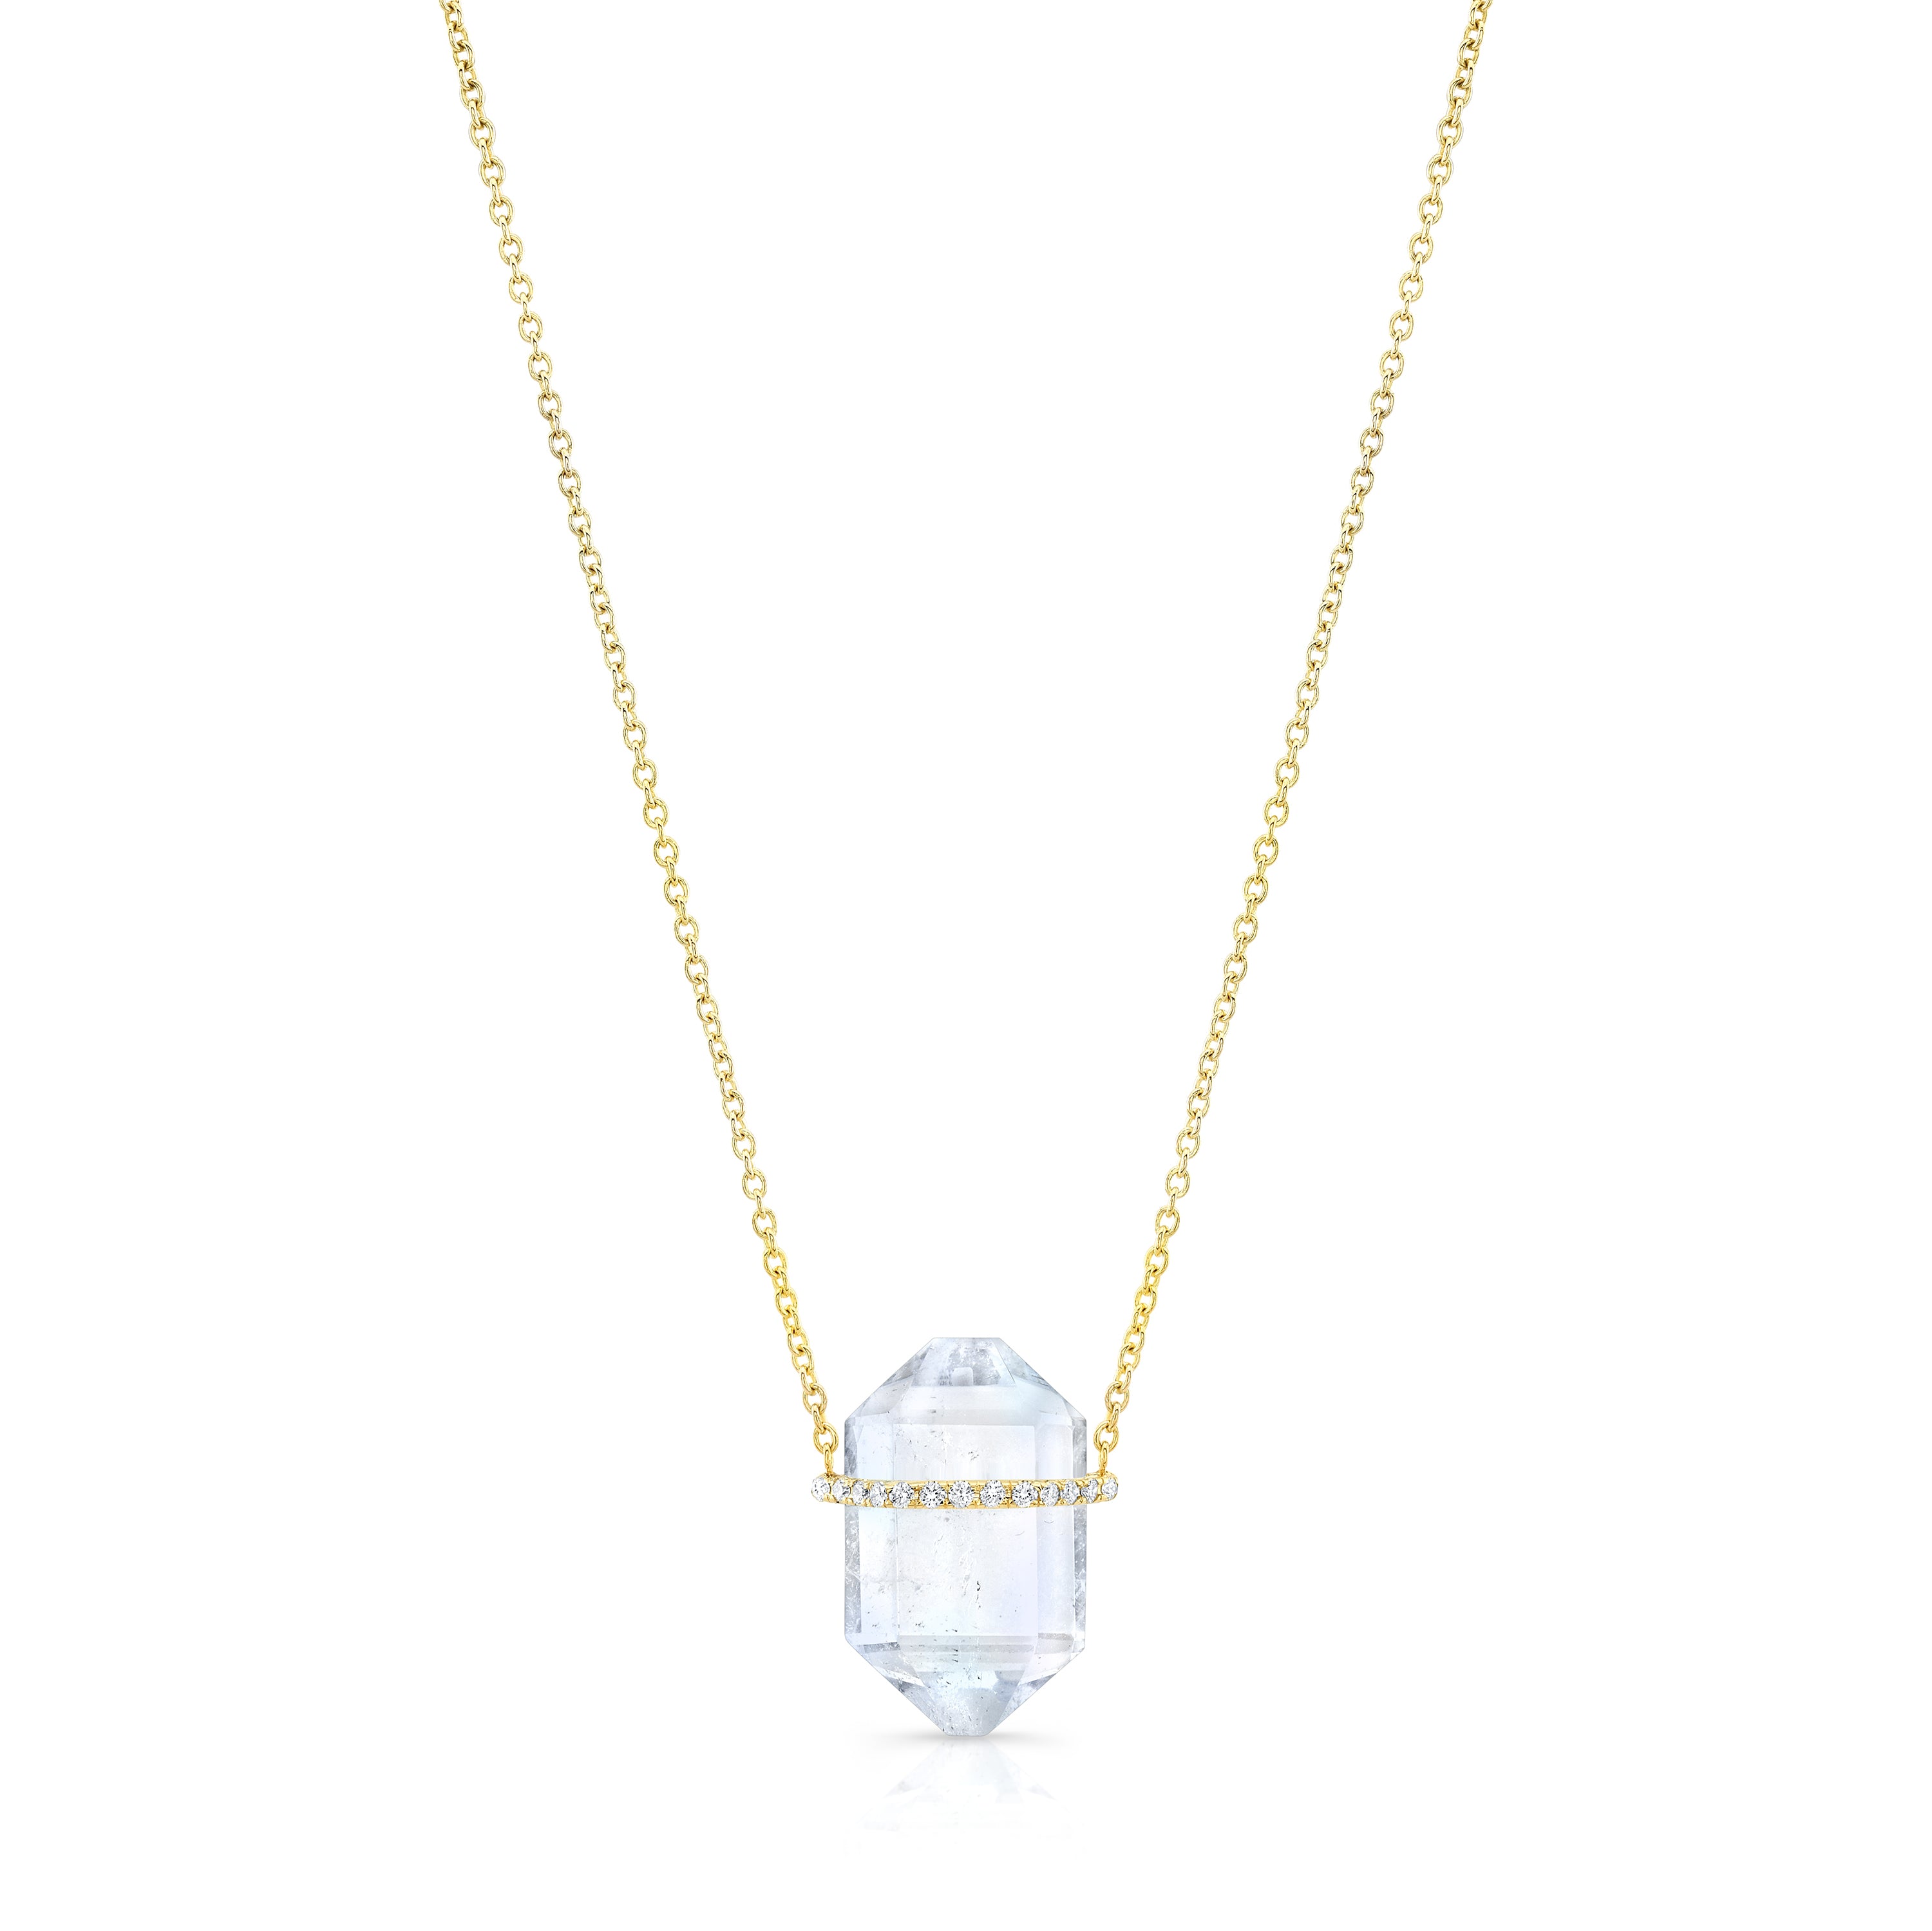 14ky gold aquamarine crystal pendant necklace with diamonds. Unique and one-of-a-kind jewelry. Shop now for a touch of luxury.